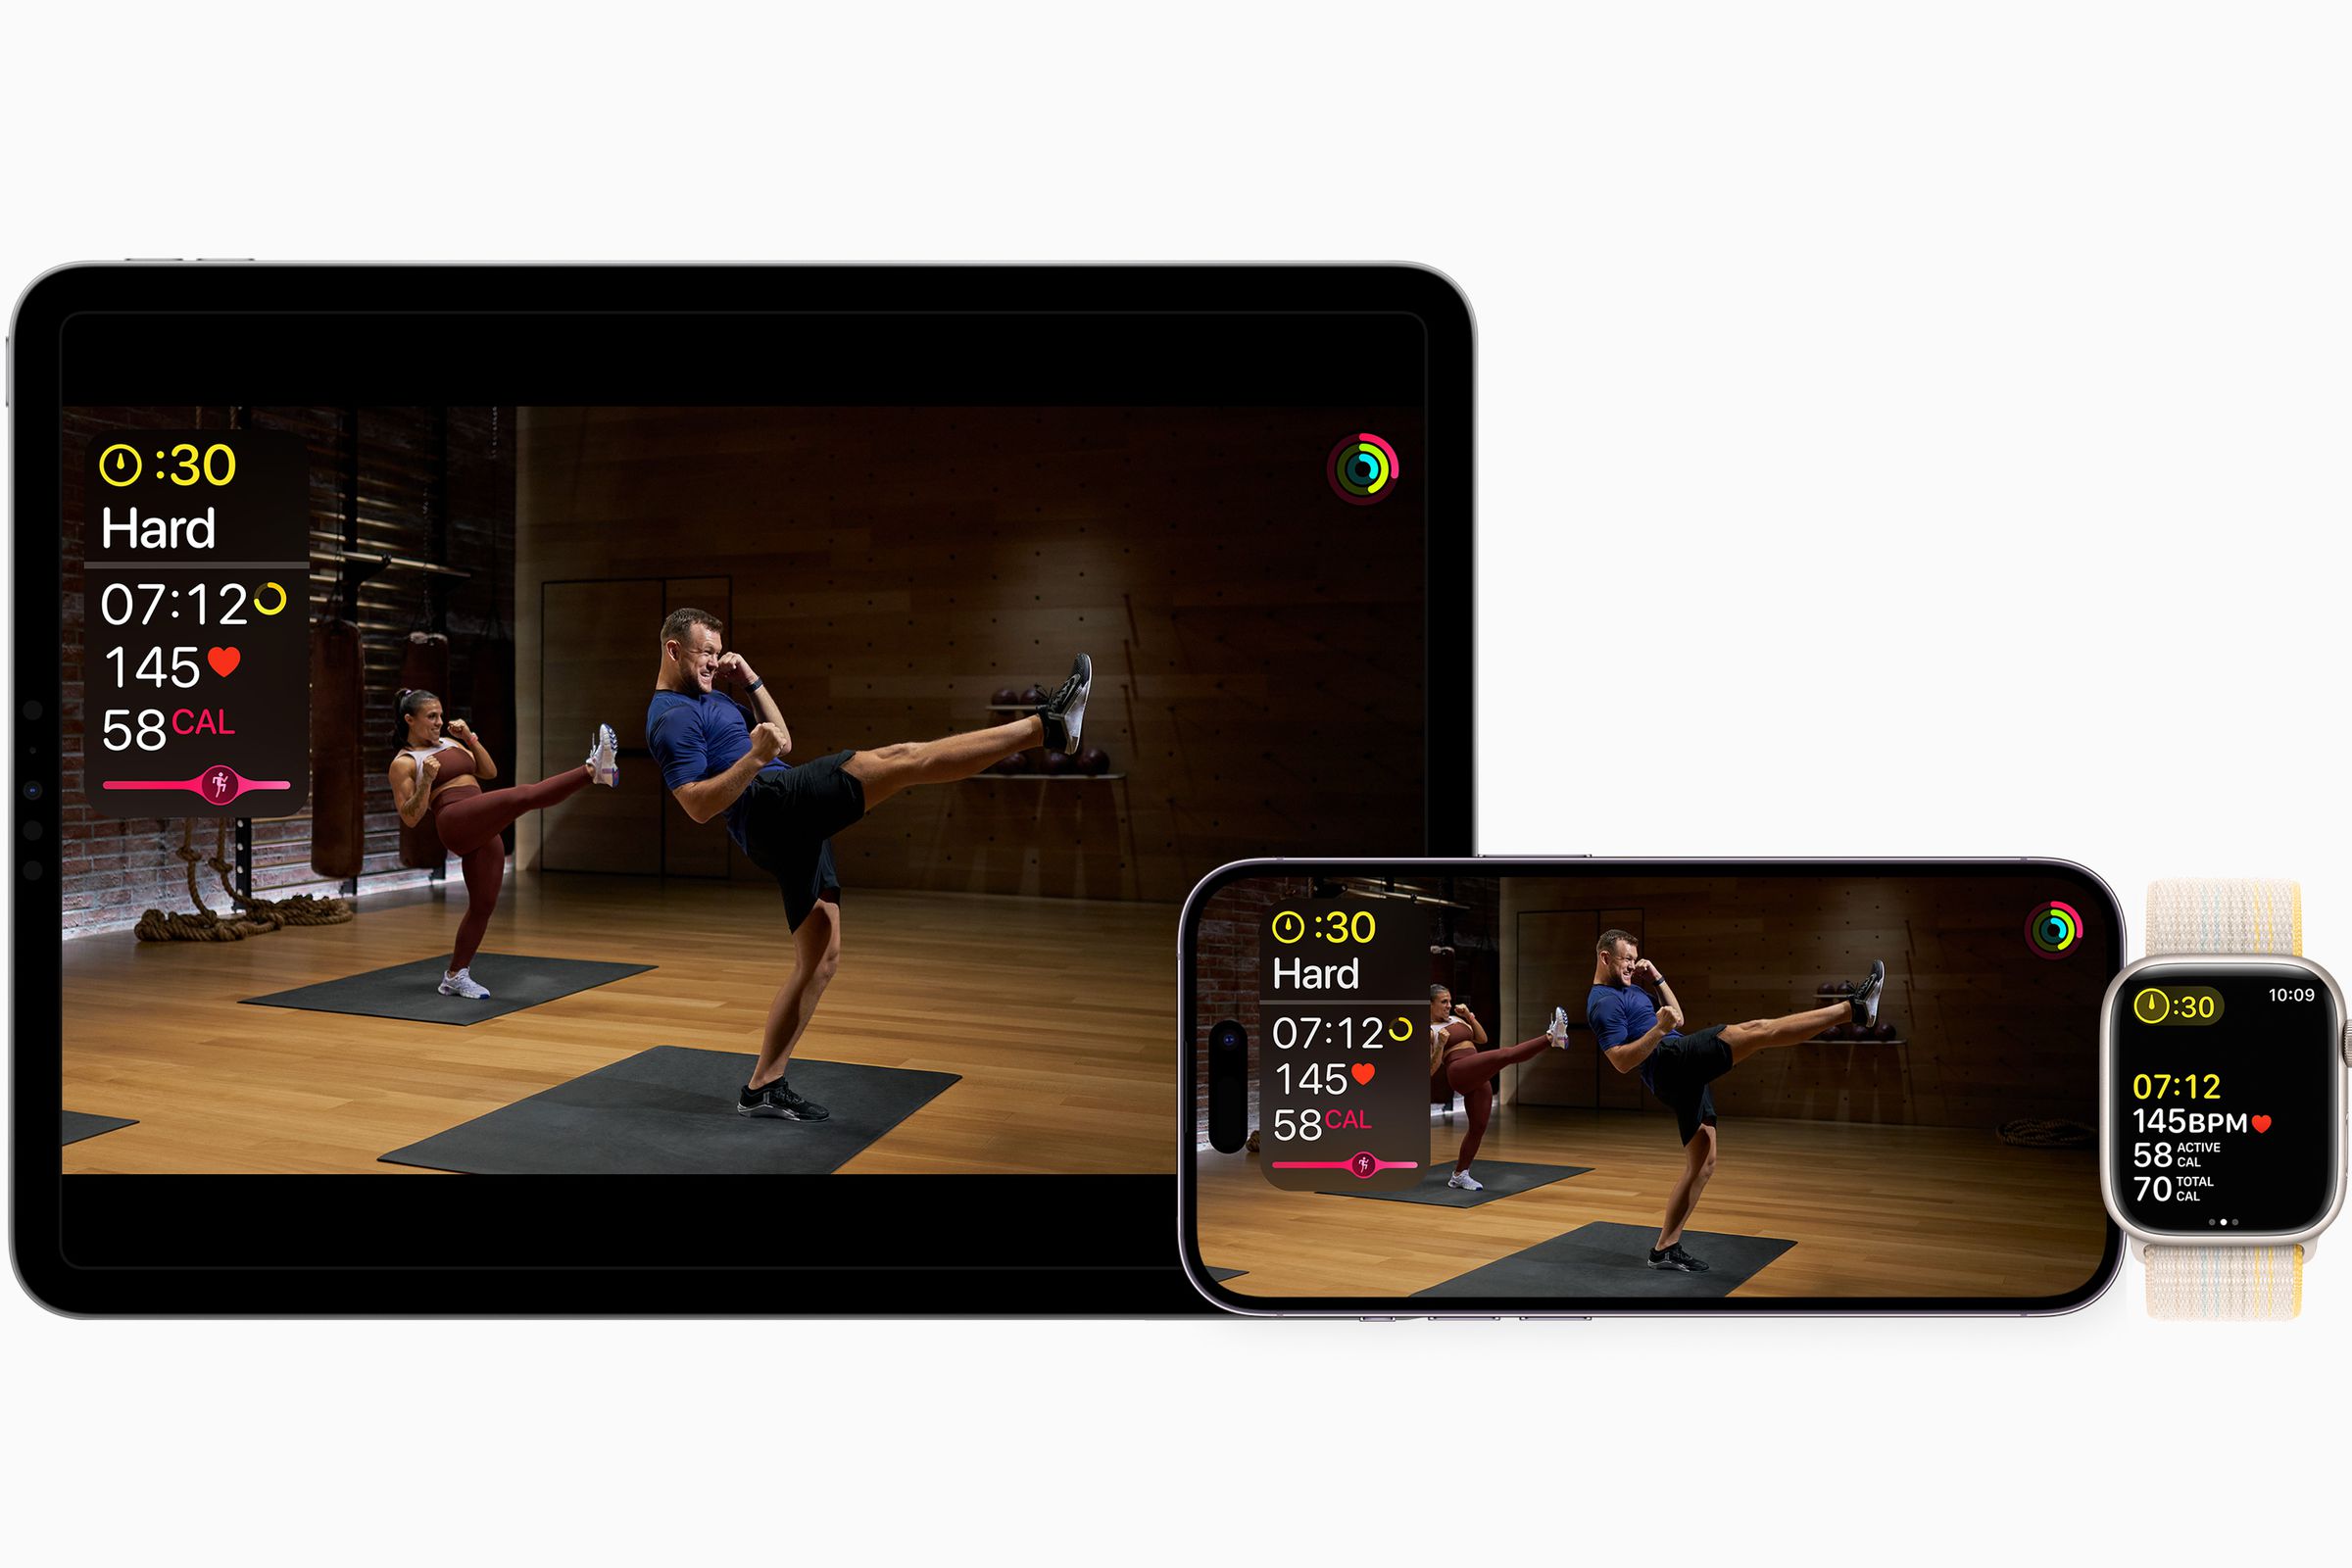 Kickboxing shown in the Fitness Plus app on an iPad and iPhone screen